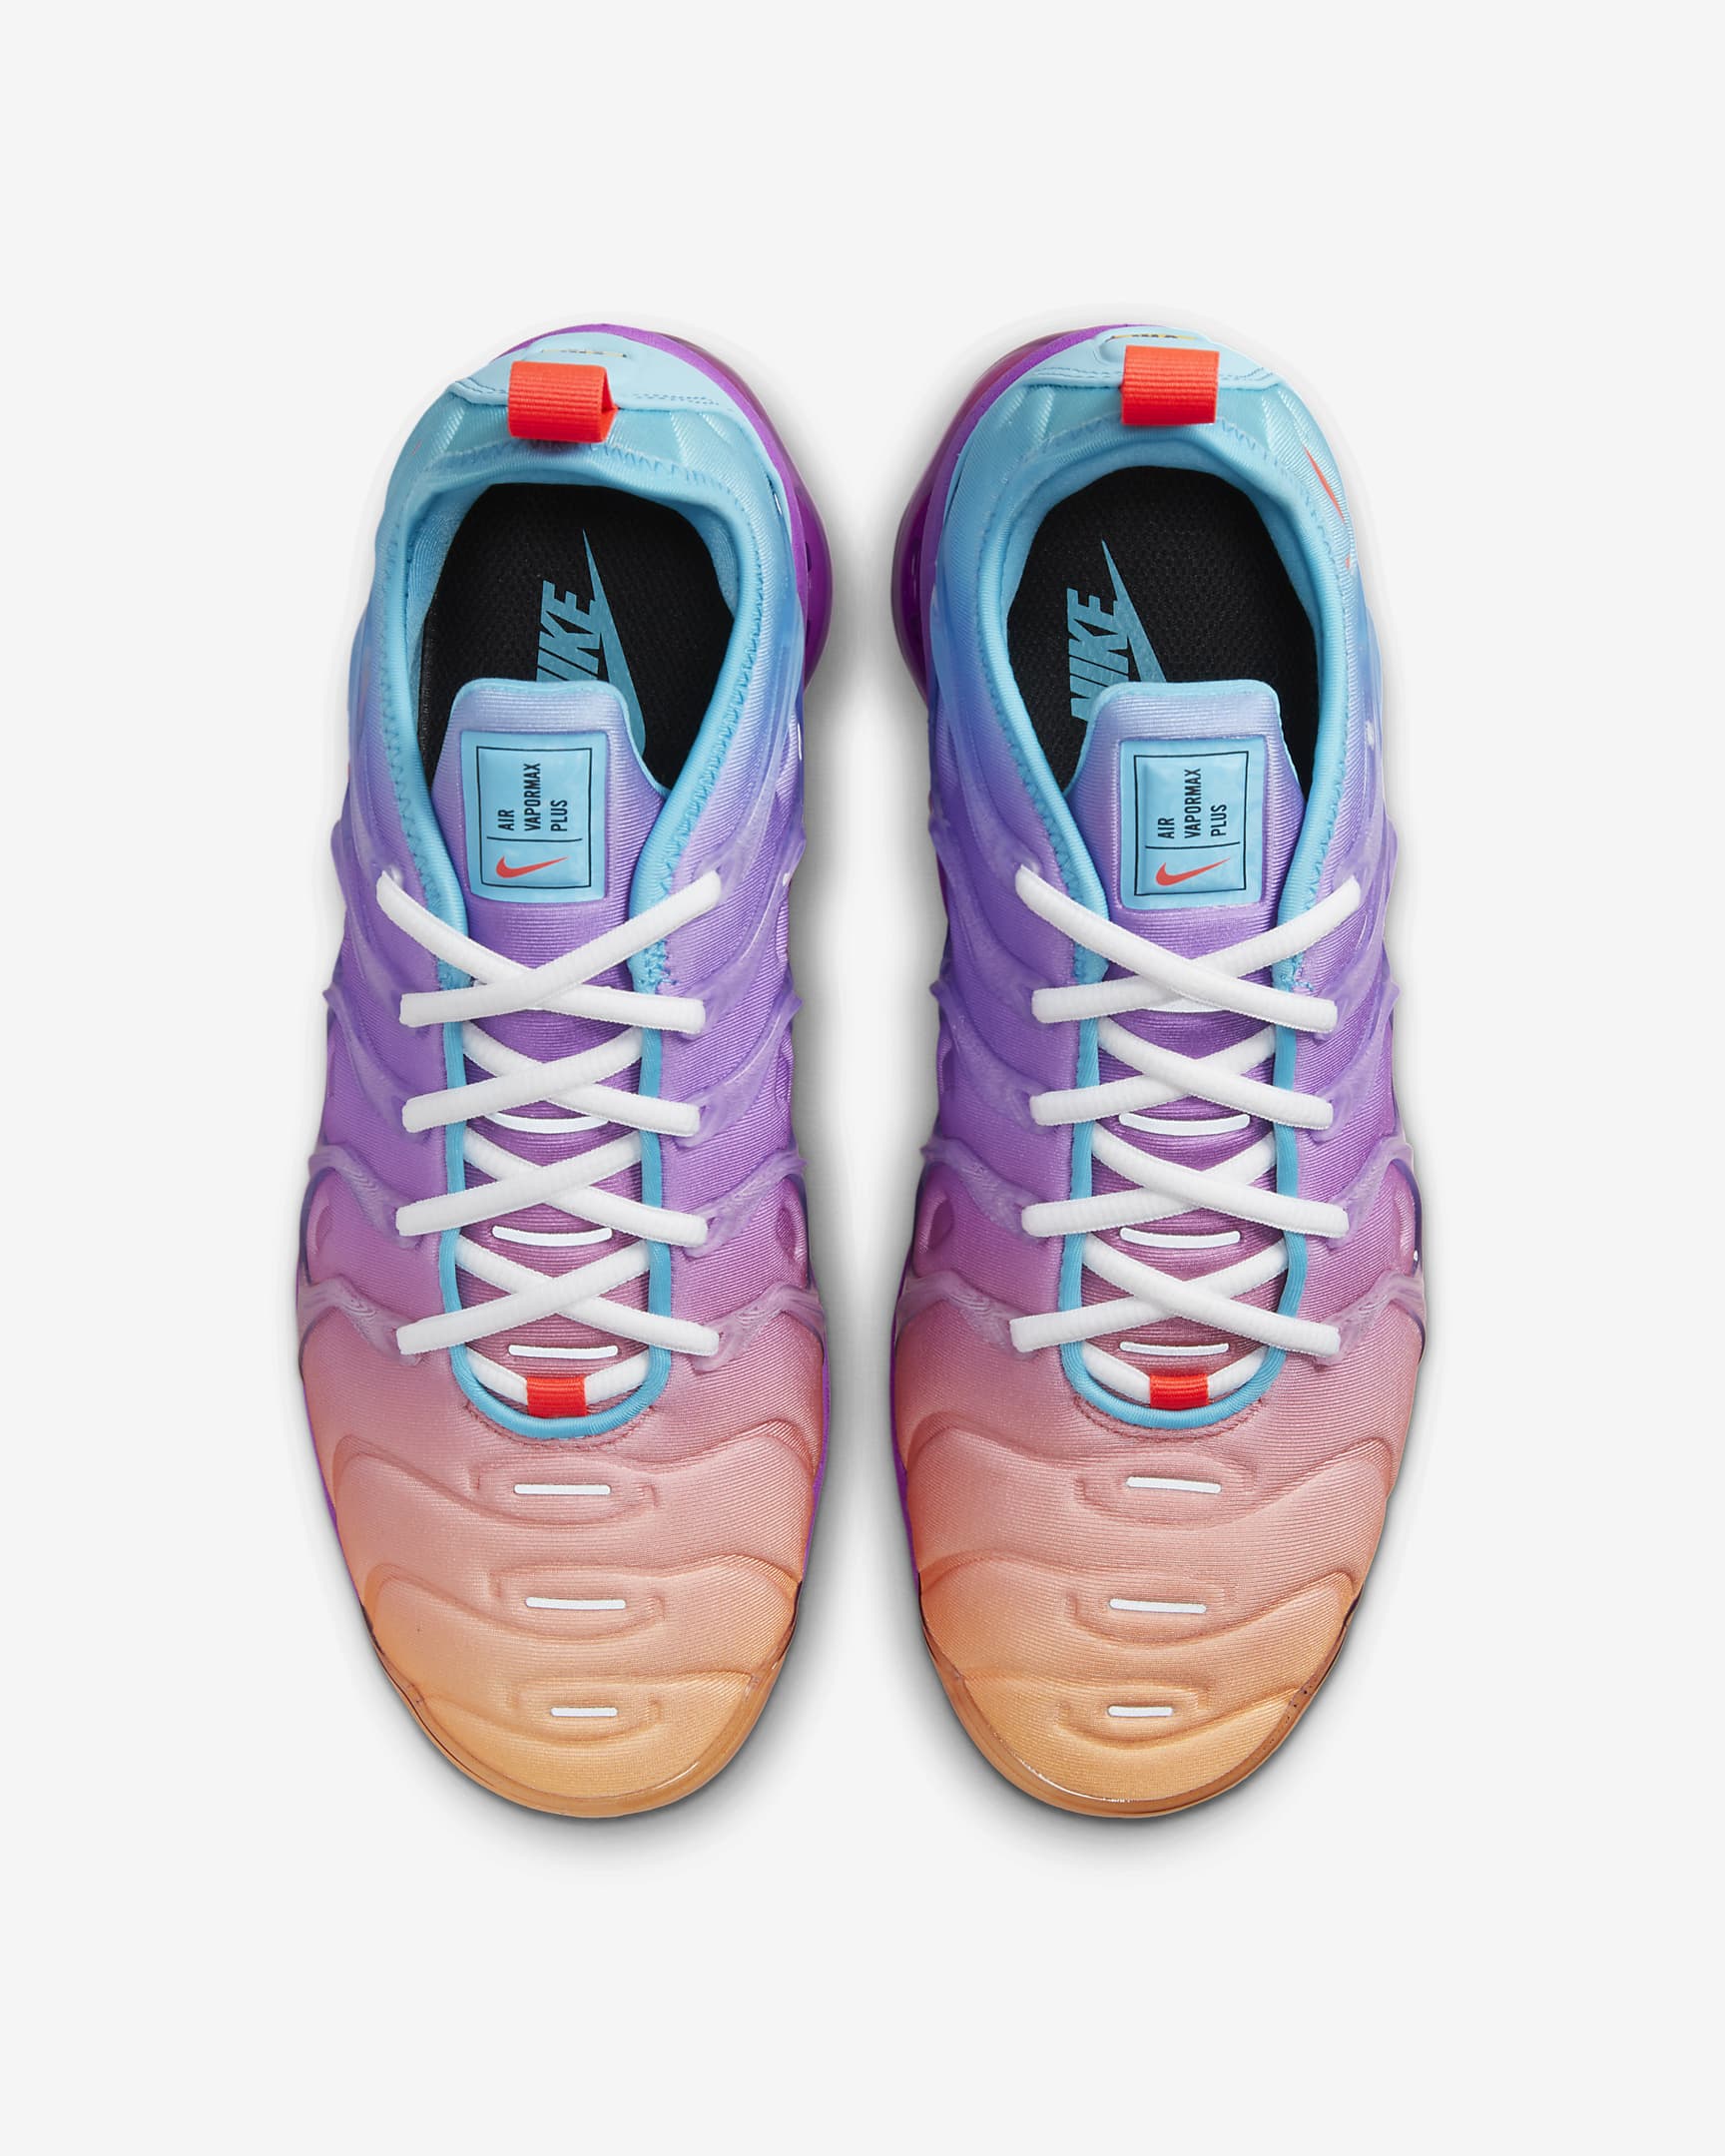 Breaking News: Nike Air VaporMax Plus Women’s Shoes Review – Pros, Cons, and Jaw-Dropping Features!